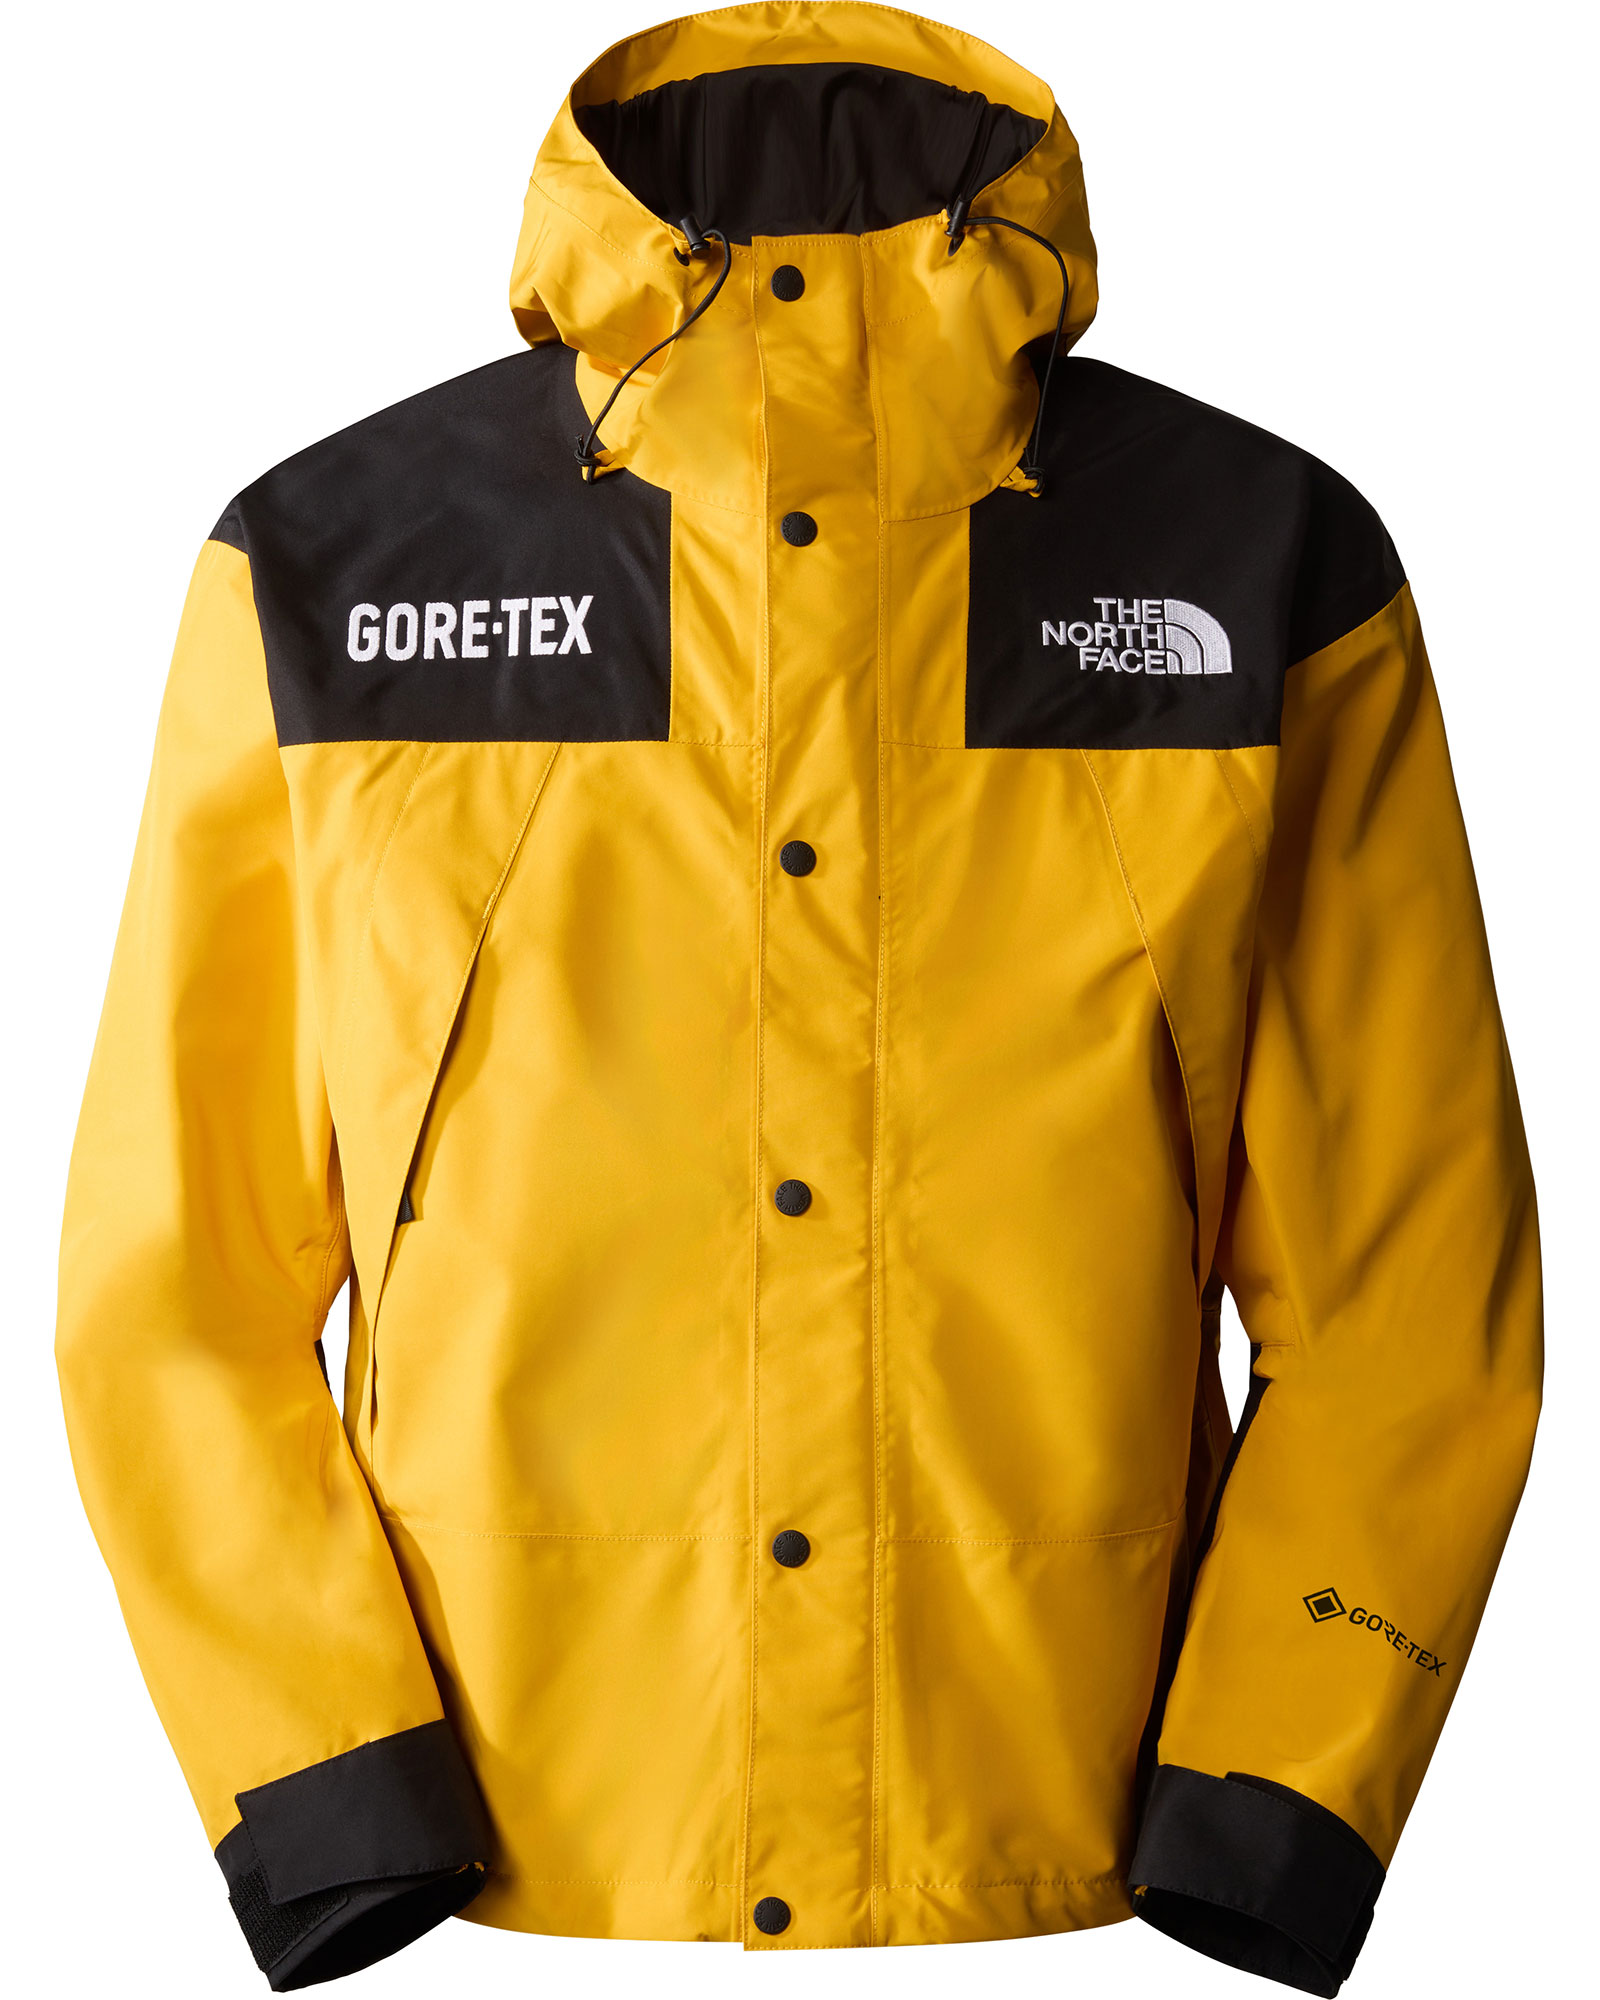 The North Face Men’s Mountain GORE TEX Jacket - Summit Gold-TNF Black XS